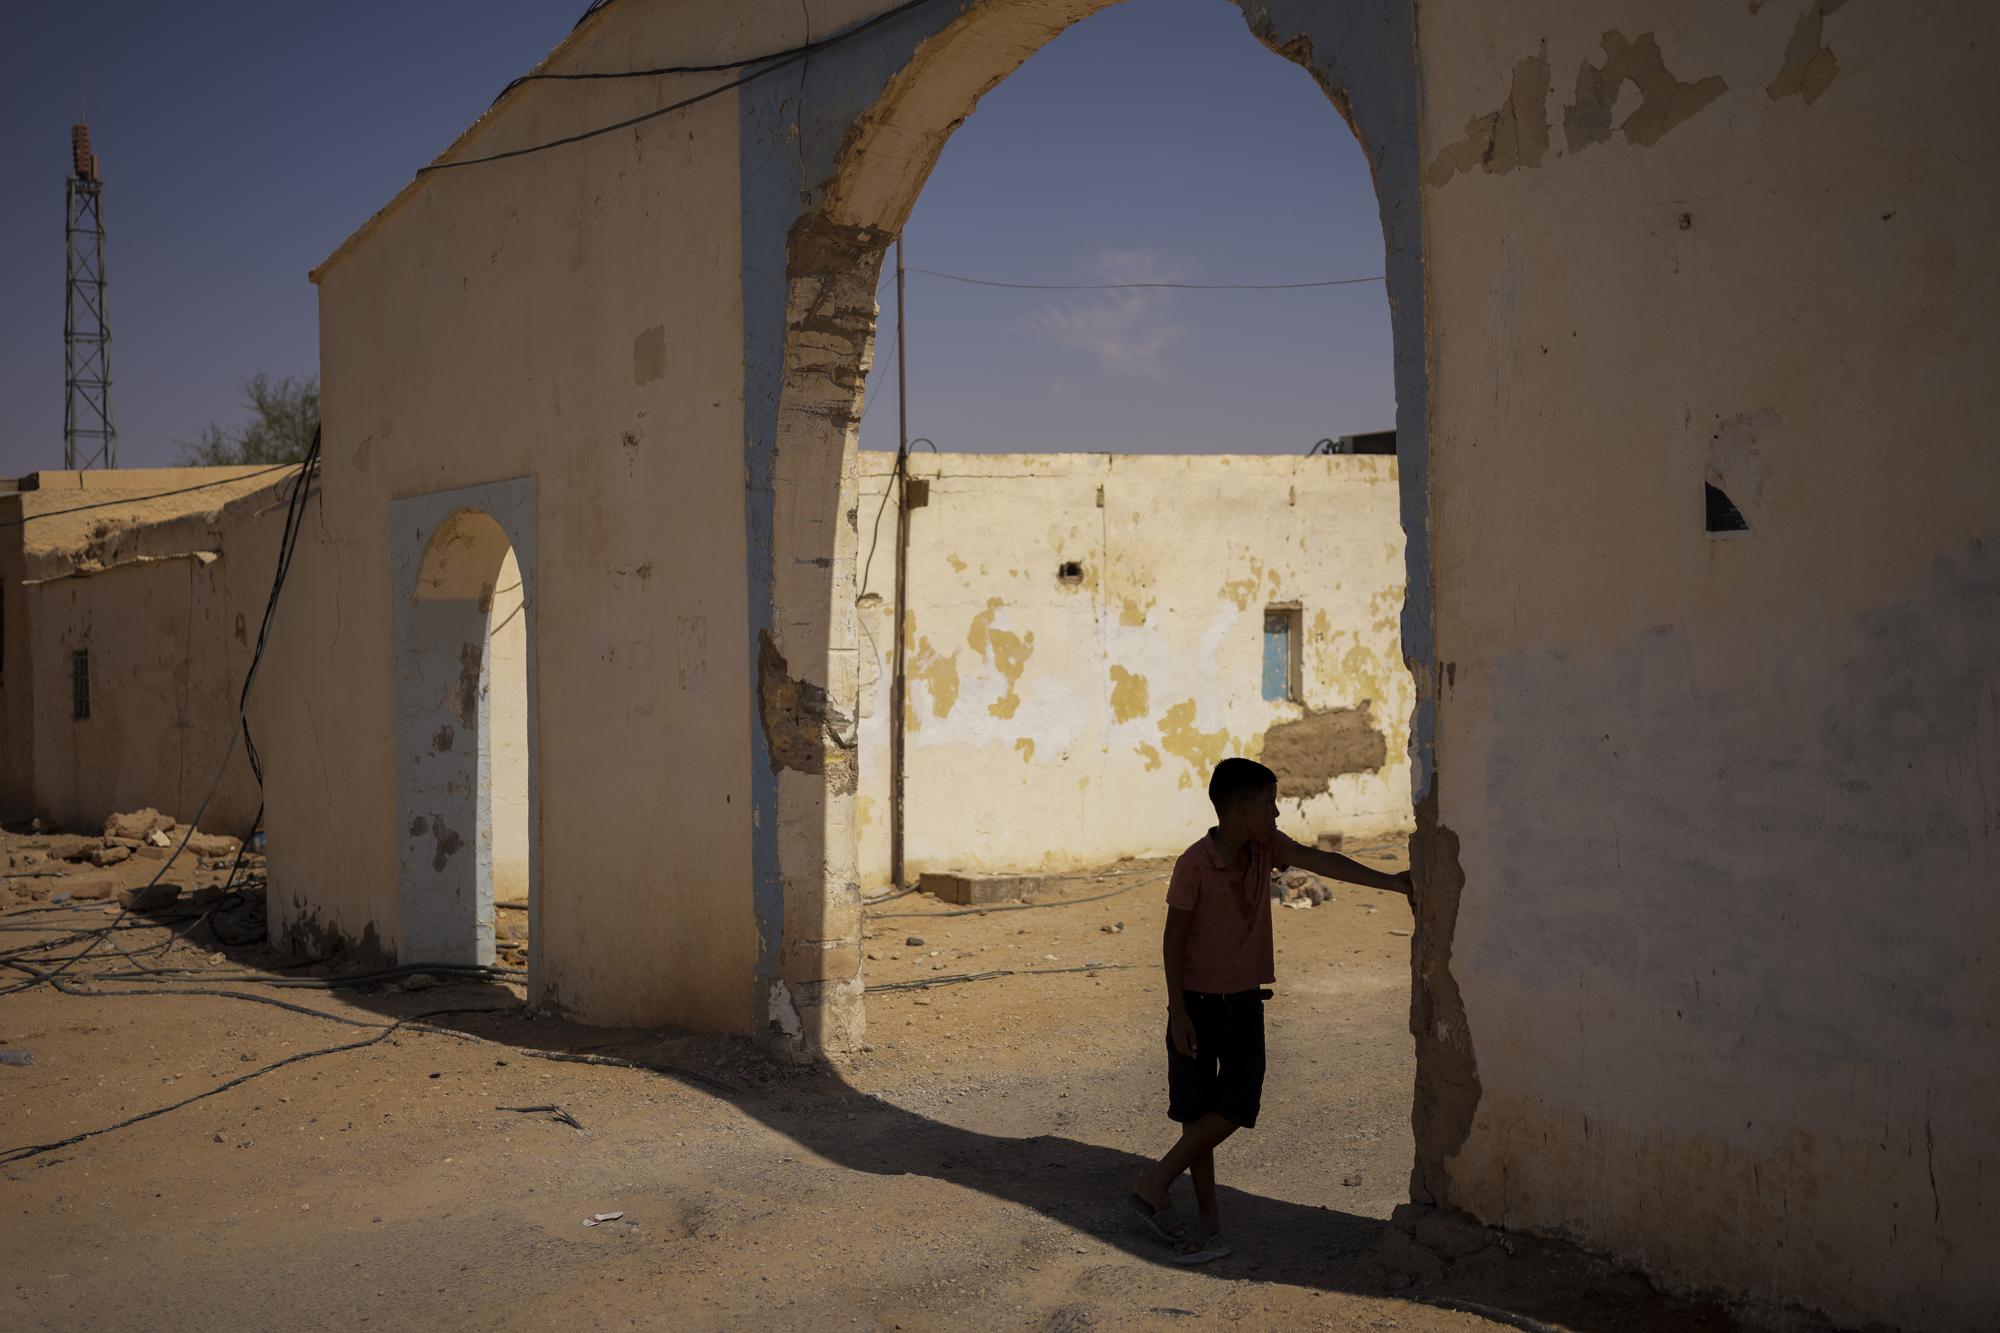 A Sahrawi refugee boy stands in the shadow in the Boujdour refugee camp, Monday, Oct. 11, 2021. (AP Photo/Bernat Armangue)